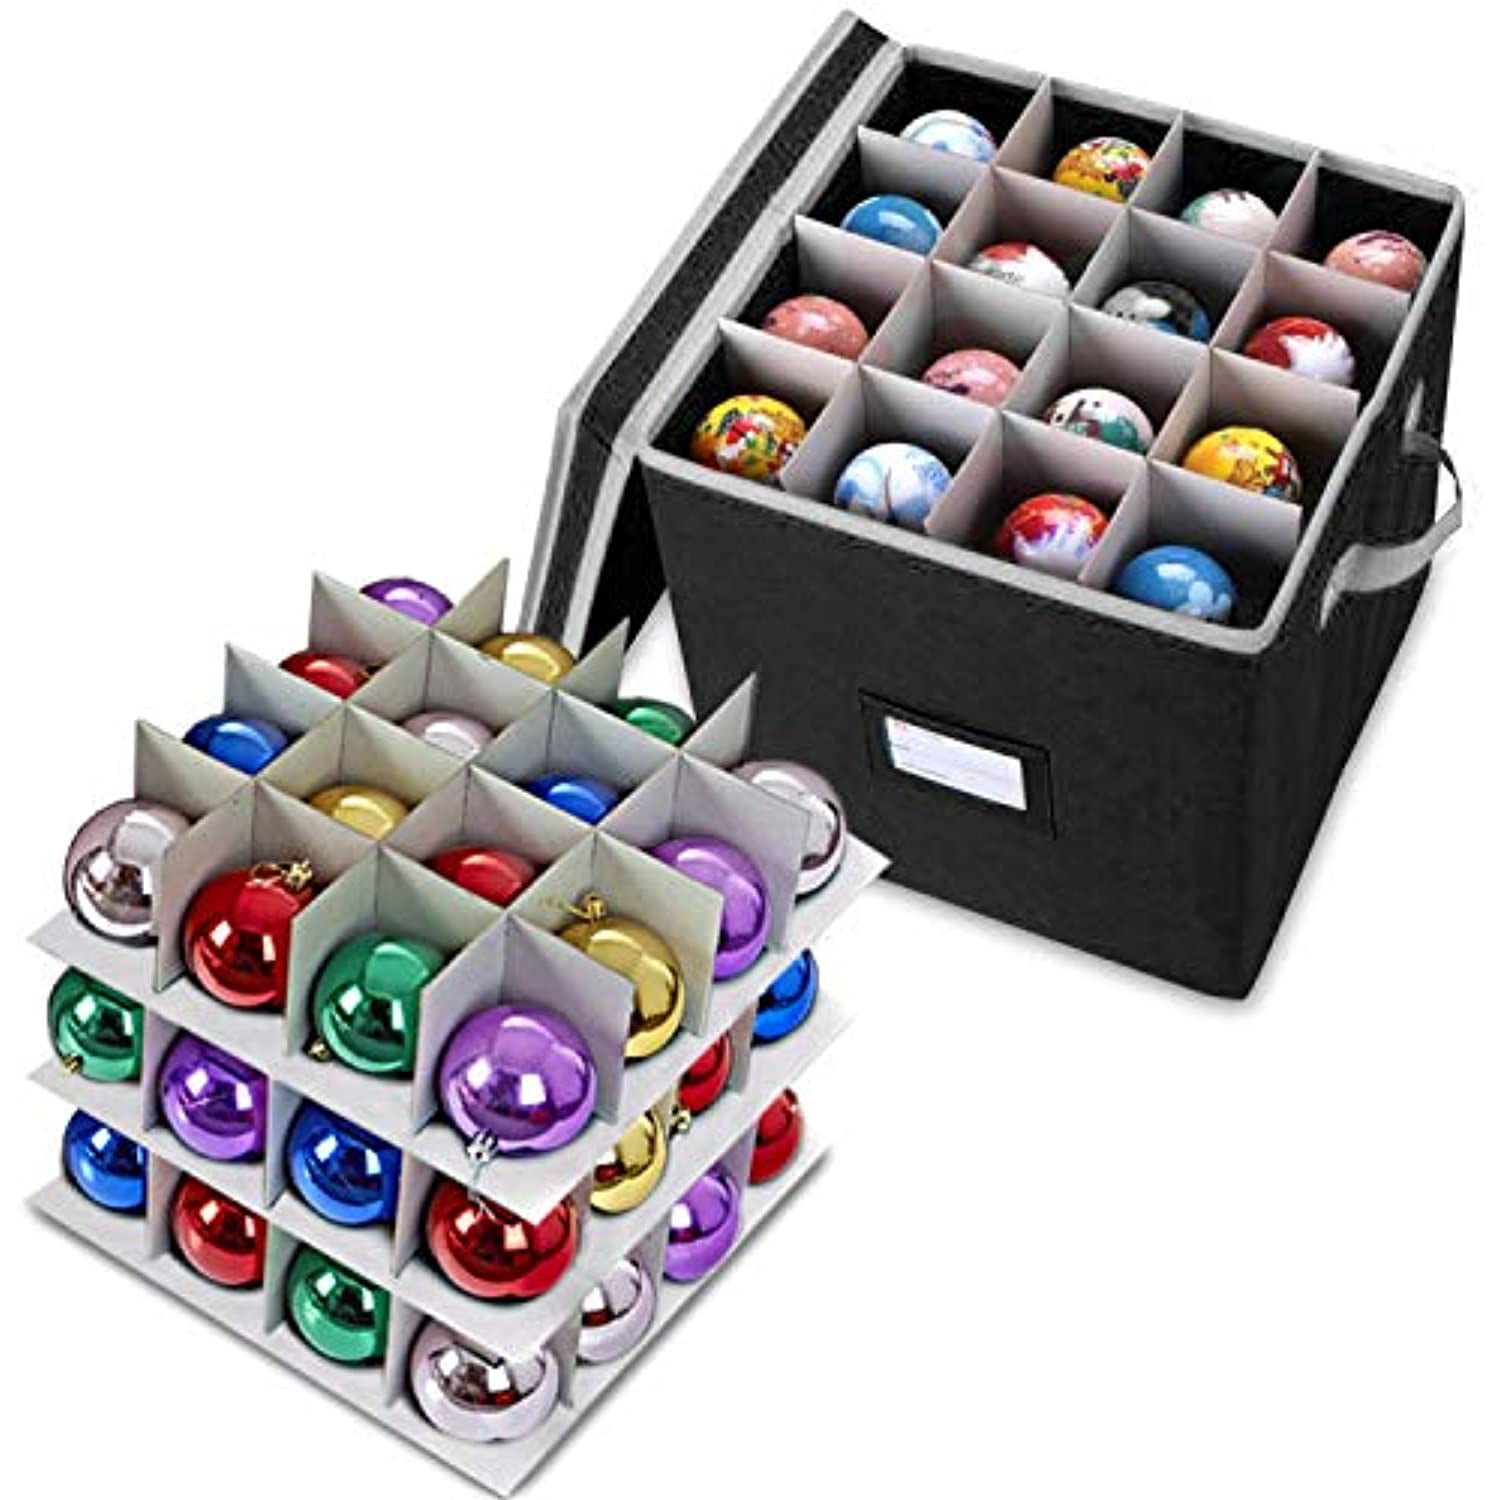 Primode Christmas Ornament Storage Box with 4 Trays, Holds Up to 64  Ornaments Decoration Balls, Holiday